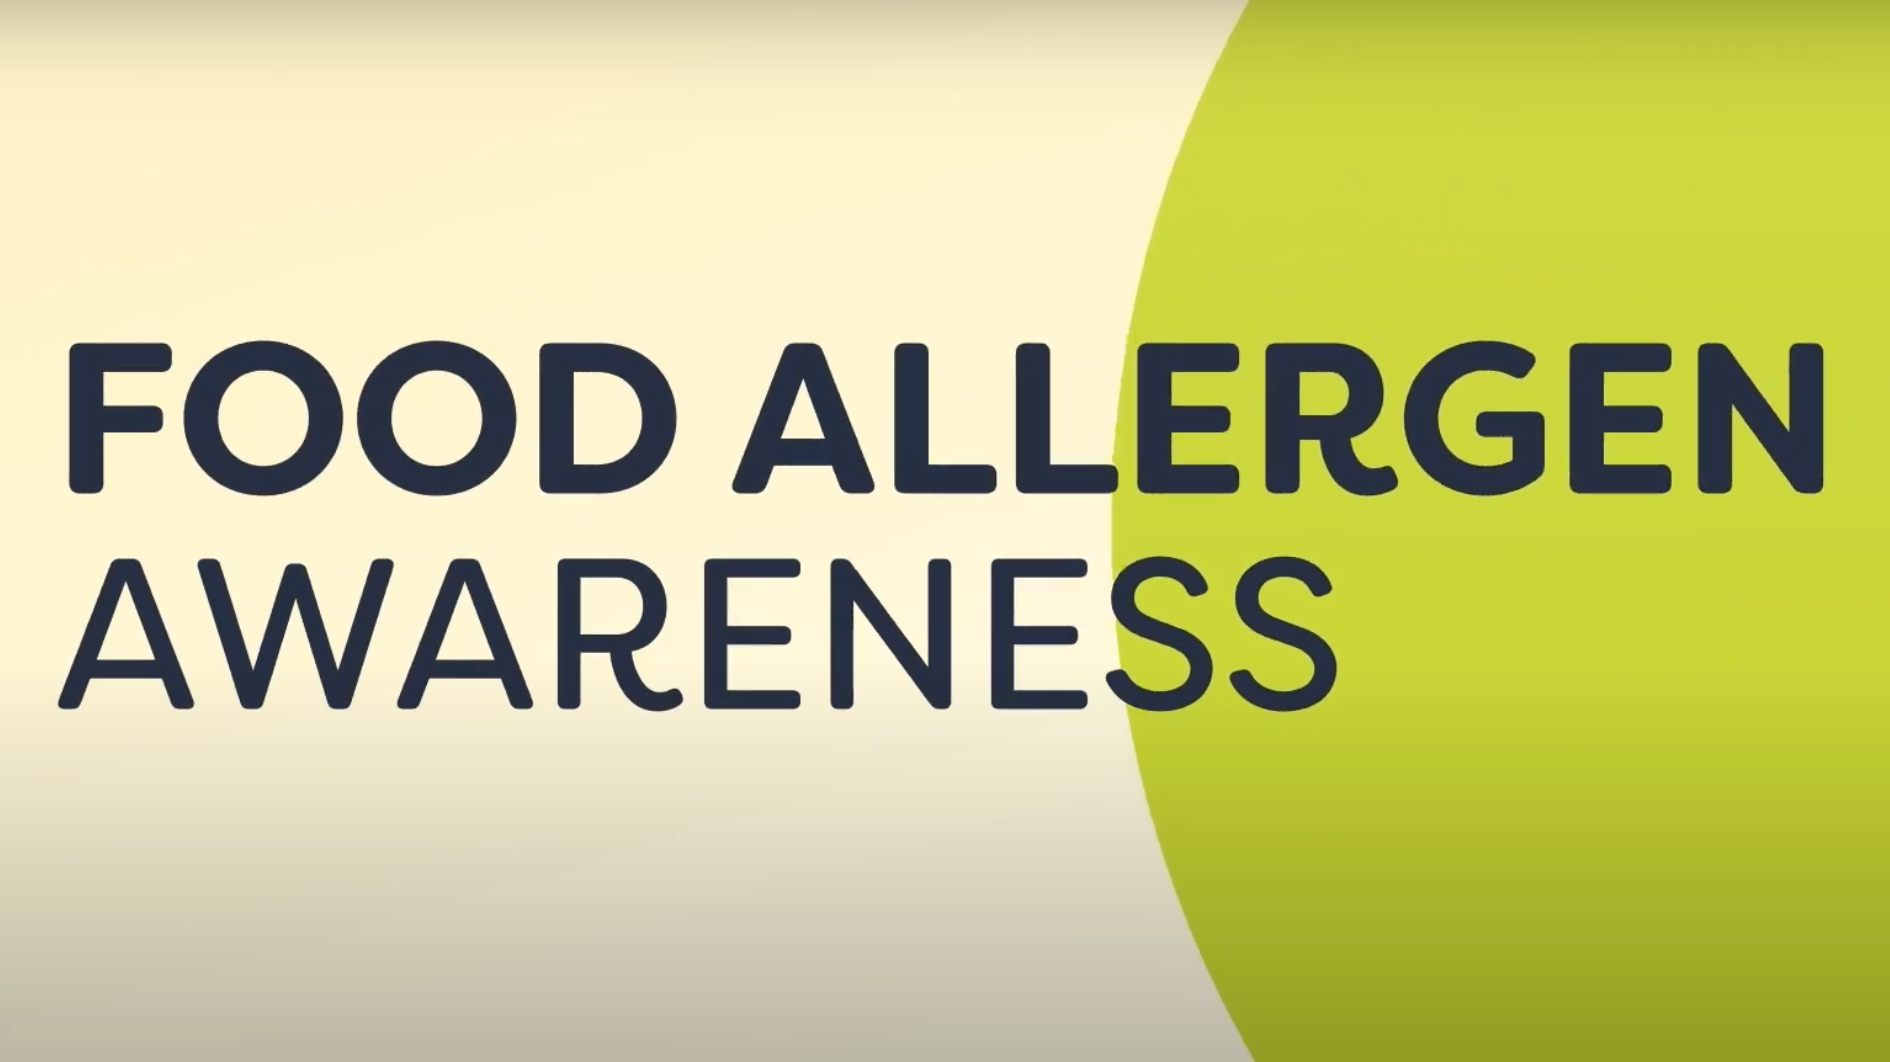 A graphic saying 'Food Allergen Awareness'